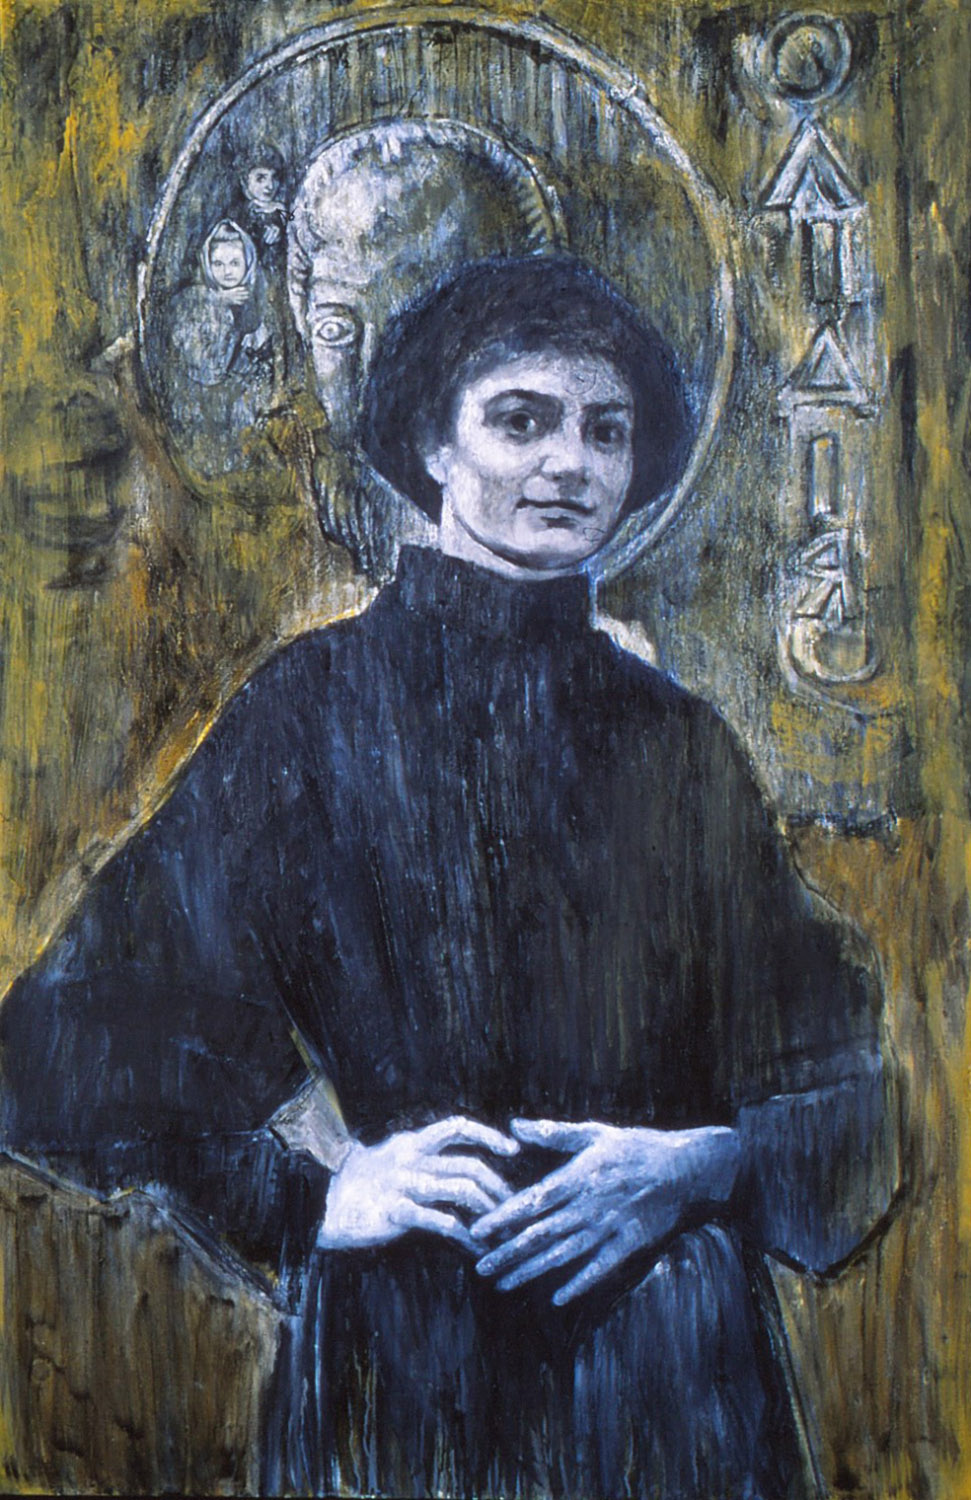 5dp(0) - My Story - oil, wax, resins on canvas, 74x47 in., 1995.jpg